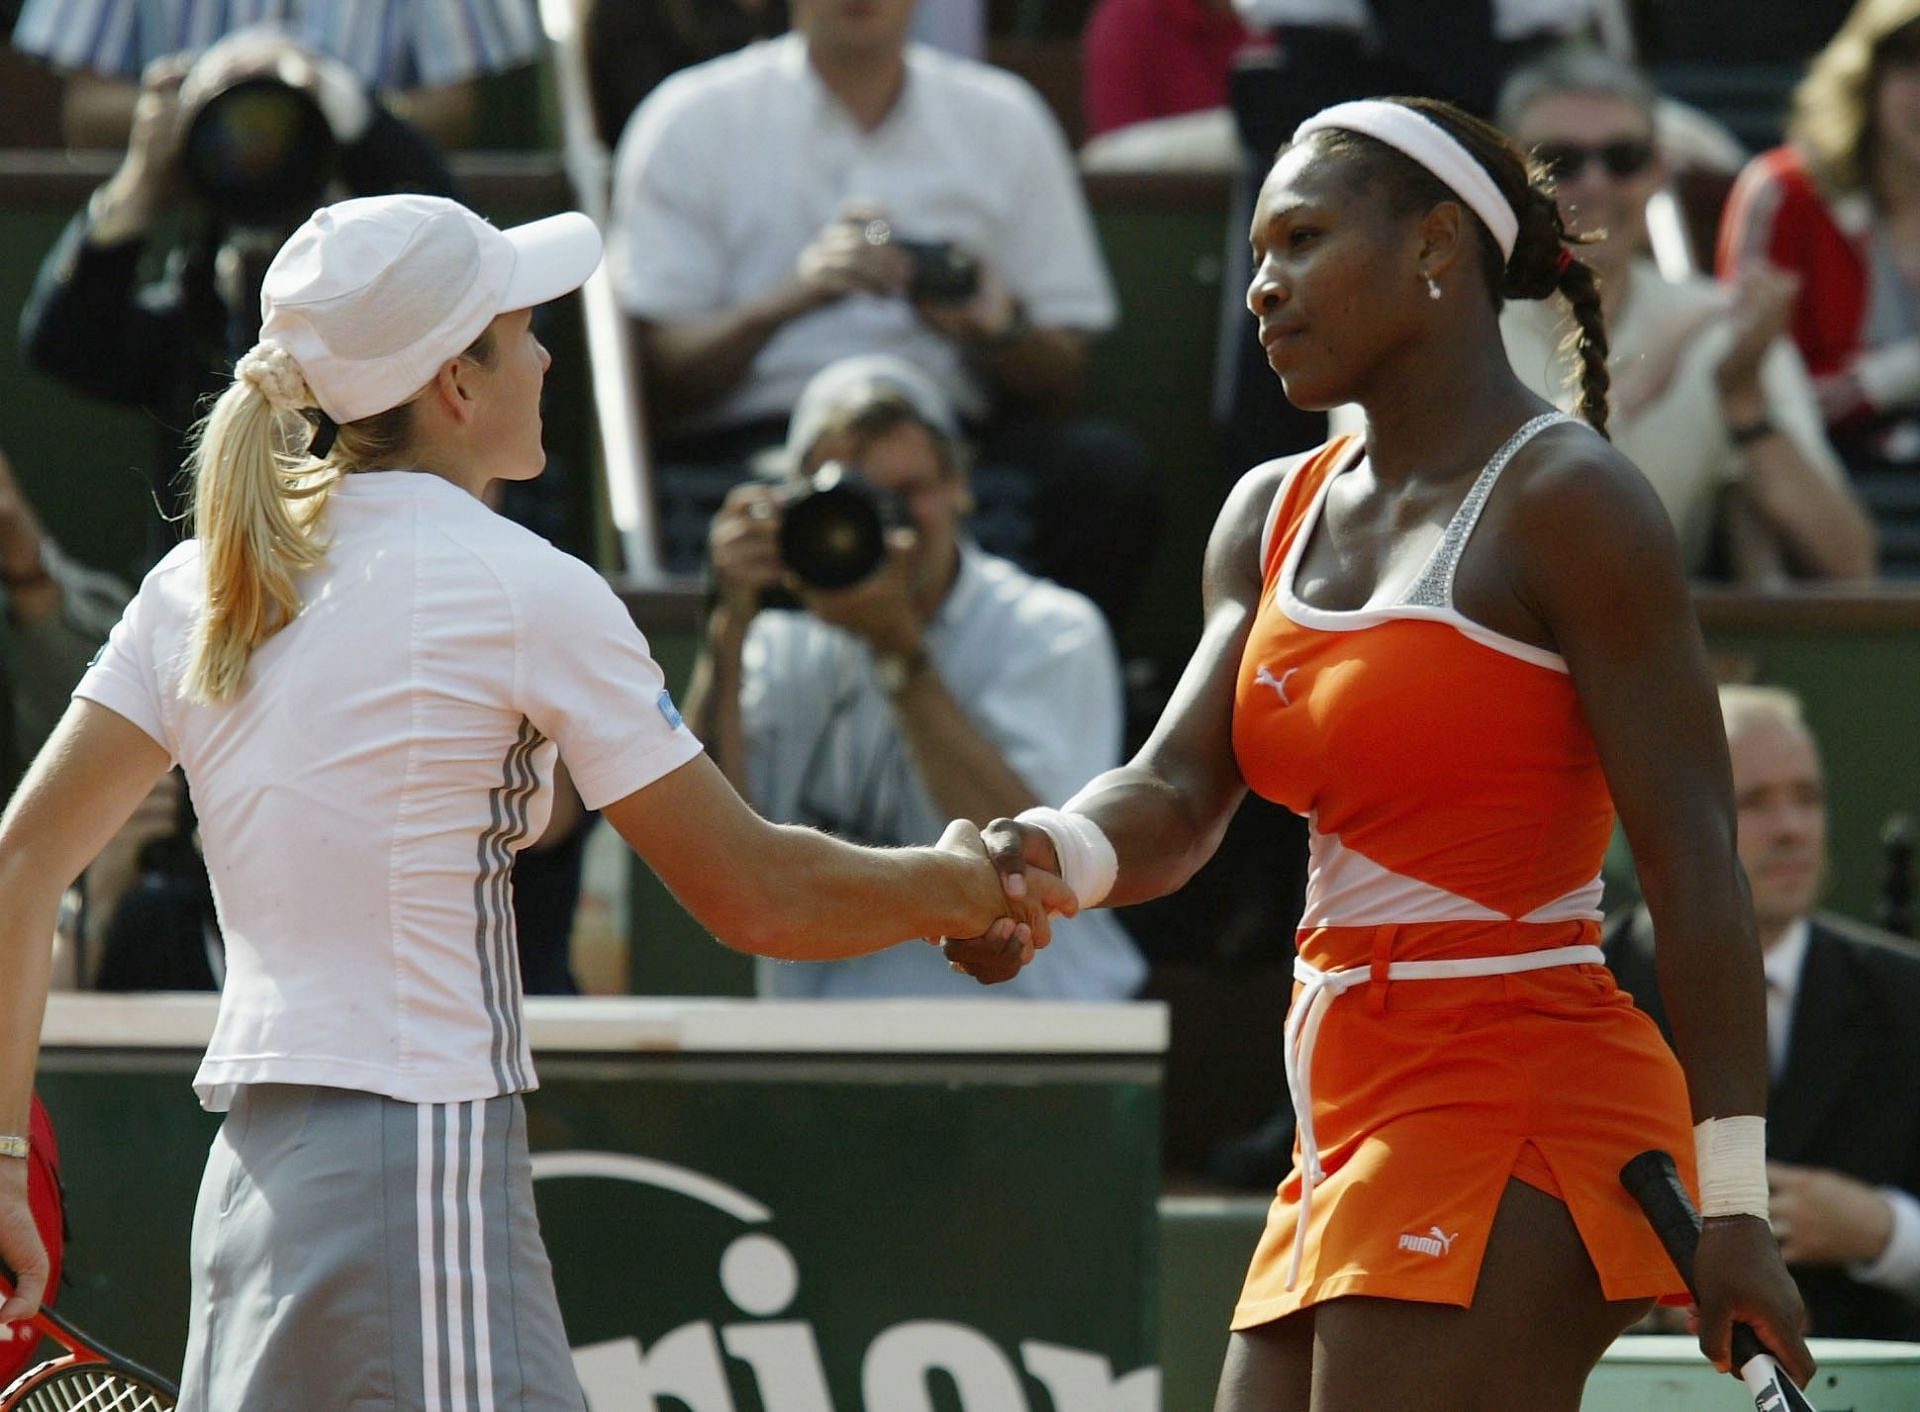 Justine Henin shakes hands with Serena Williams at the 2003 French Open